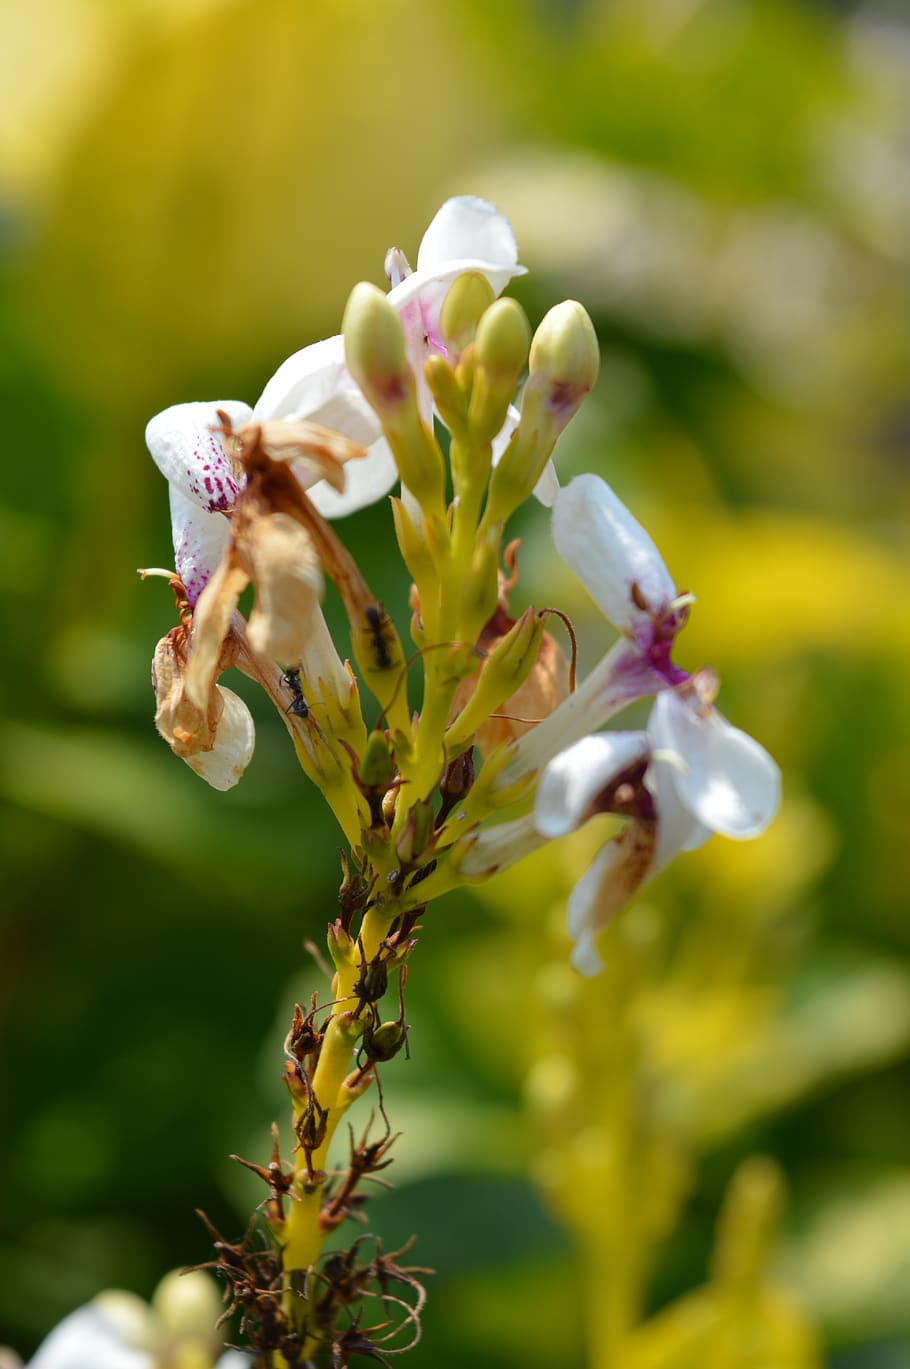 indonesia, malang, plant, flowering plant, vulnerability, fragility